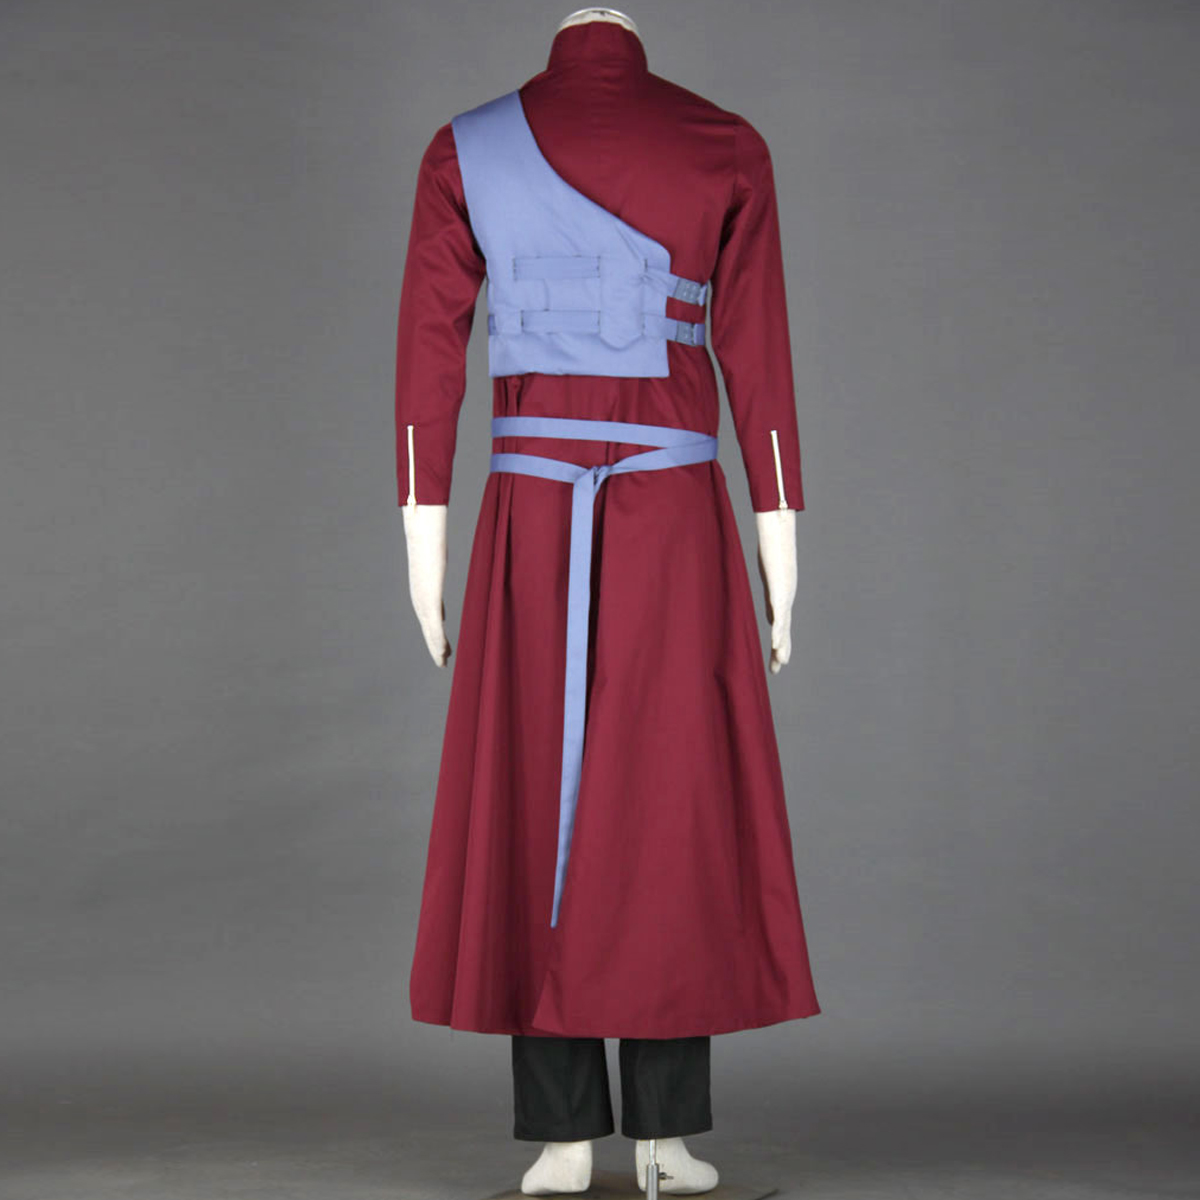 Naruto Shippuden Gaara 7 Anime Cosplay Costumes Outfit